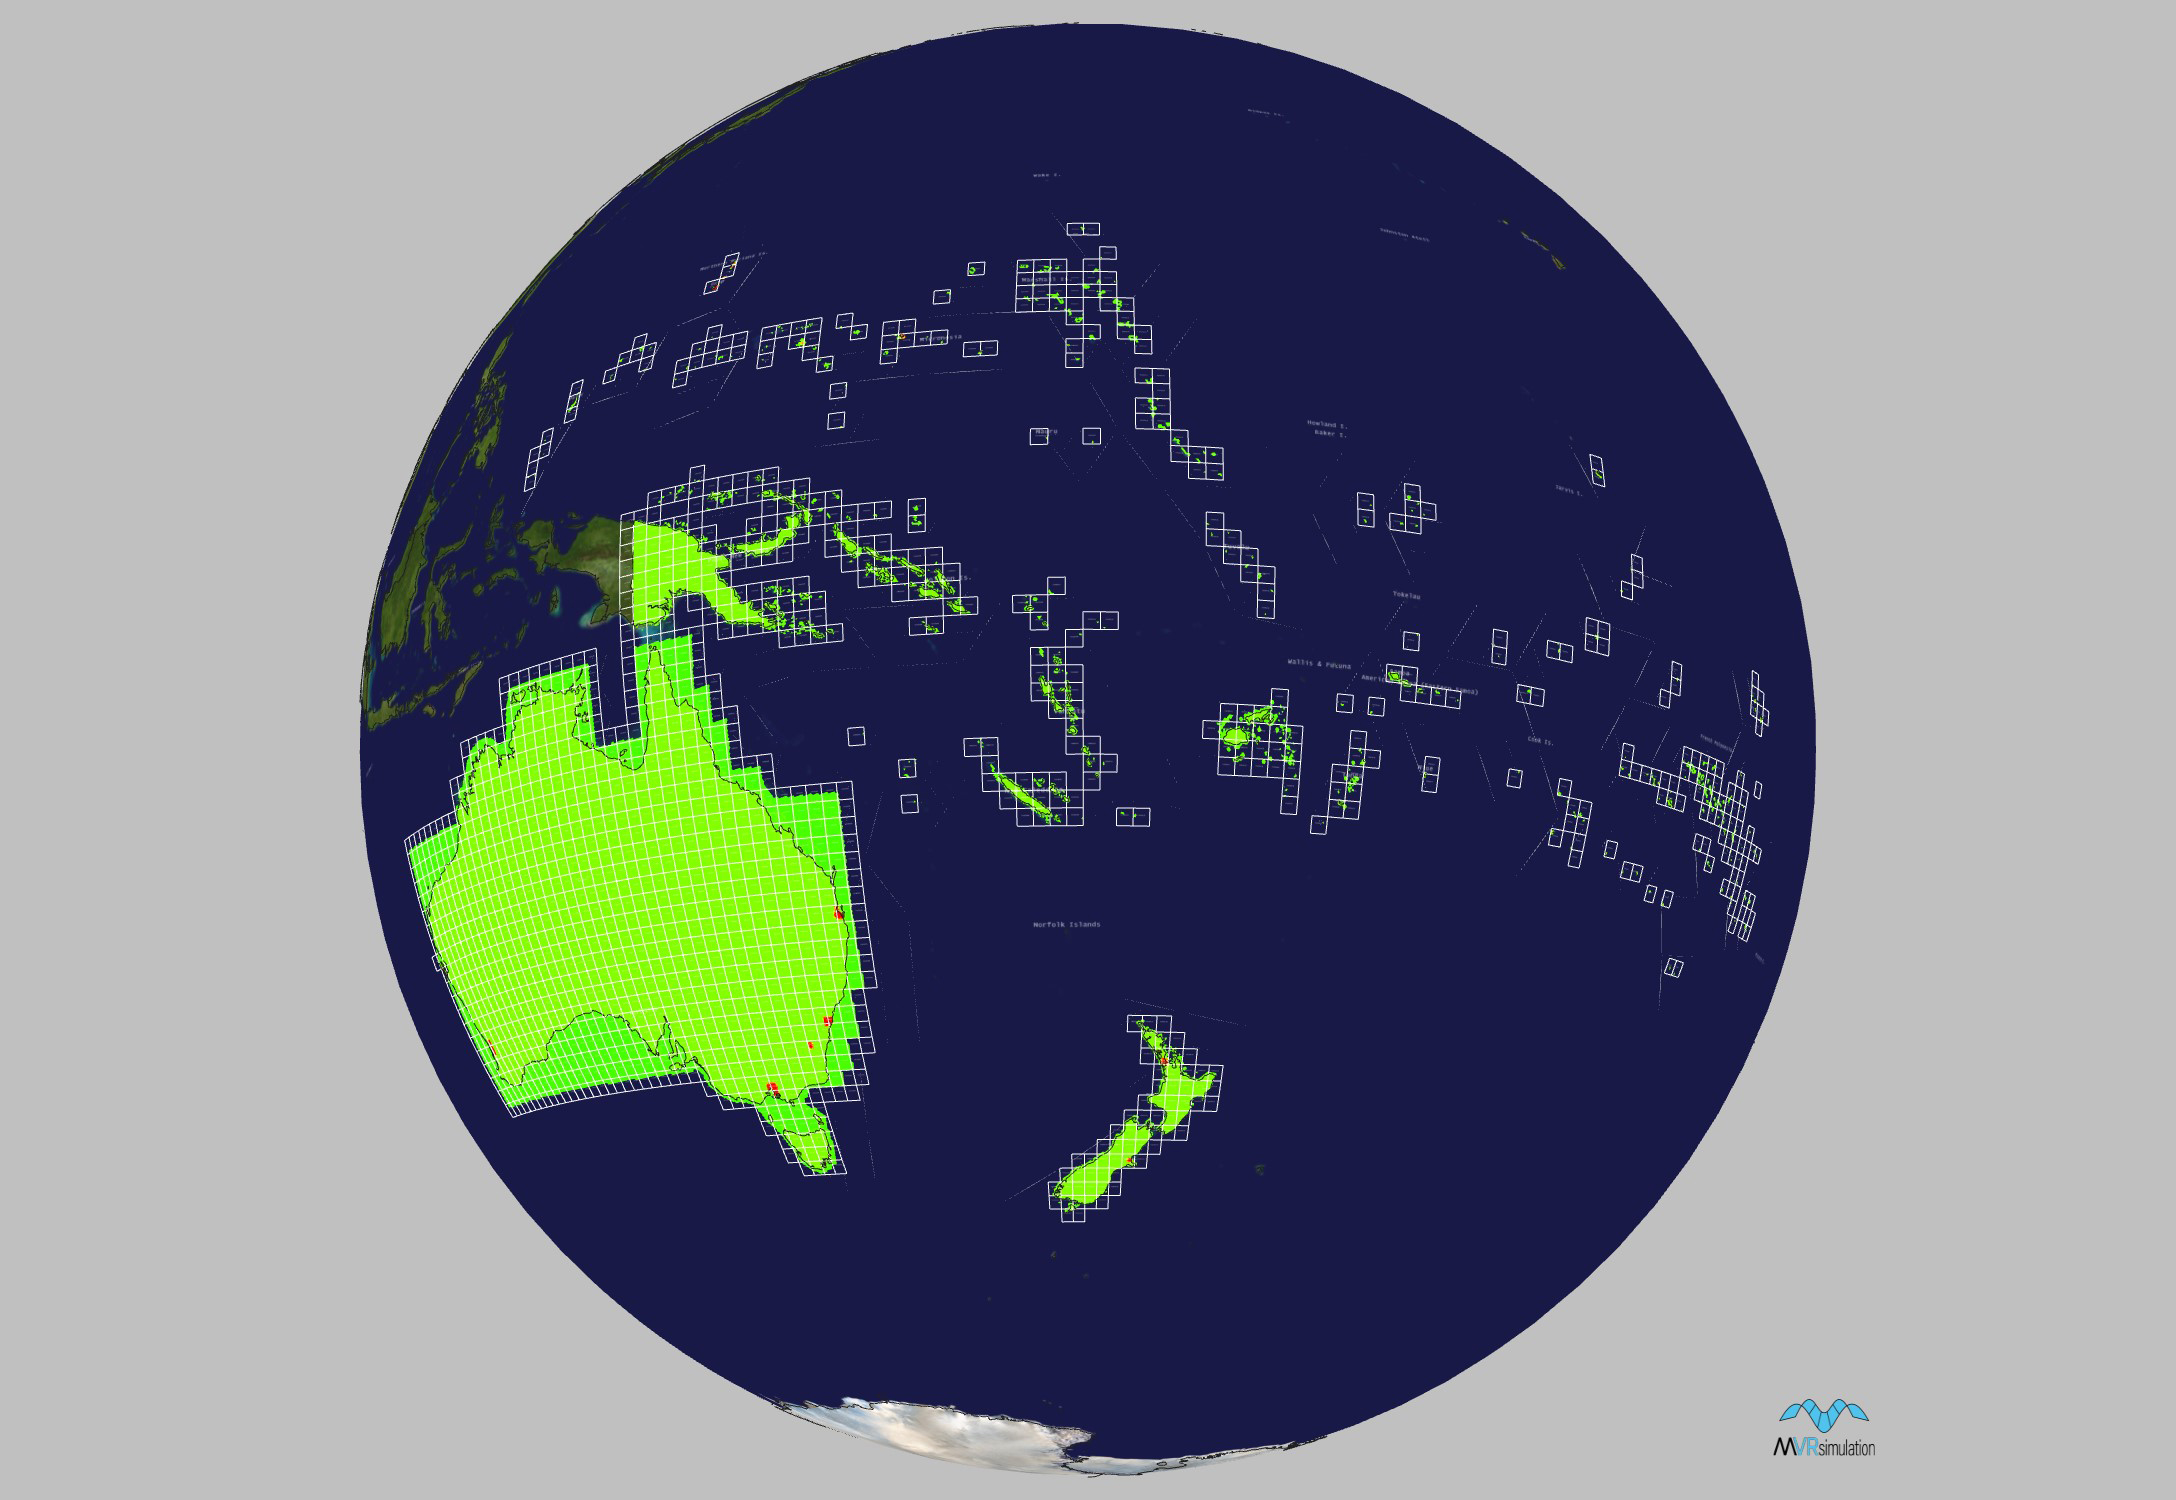 Geographic coverage of MetaVR's terrain tiles of Australia and Oceania. 